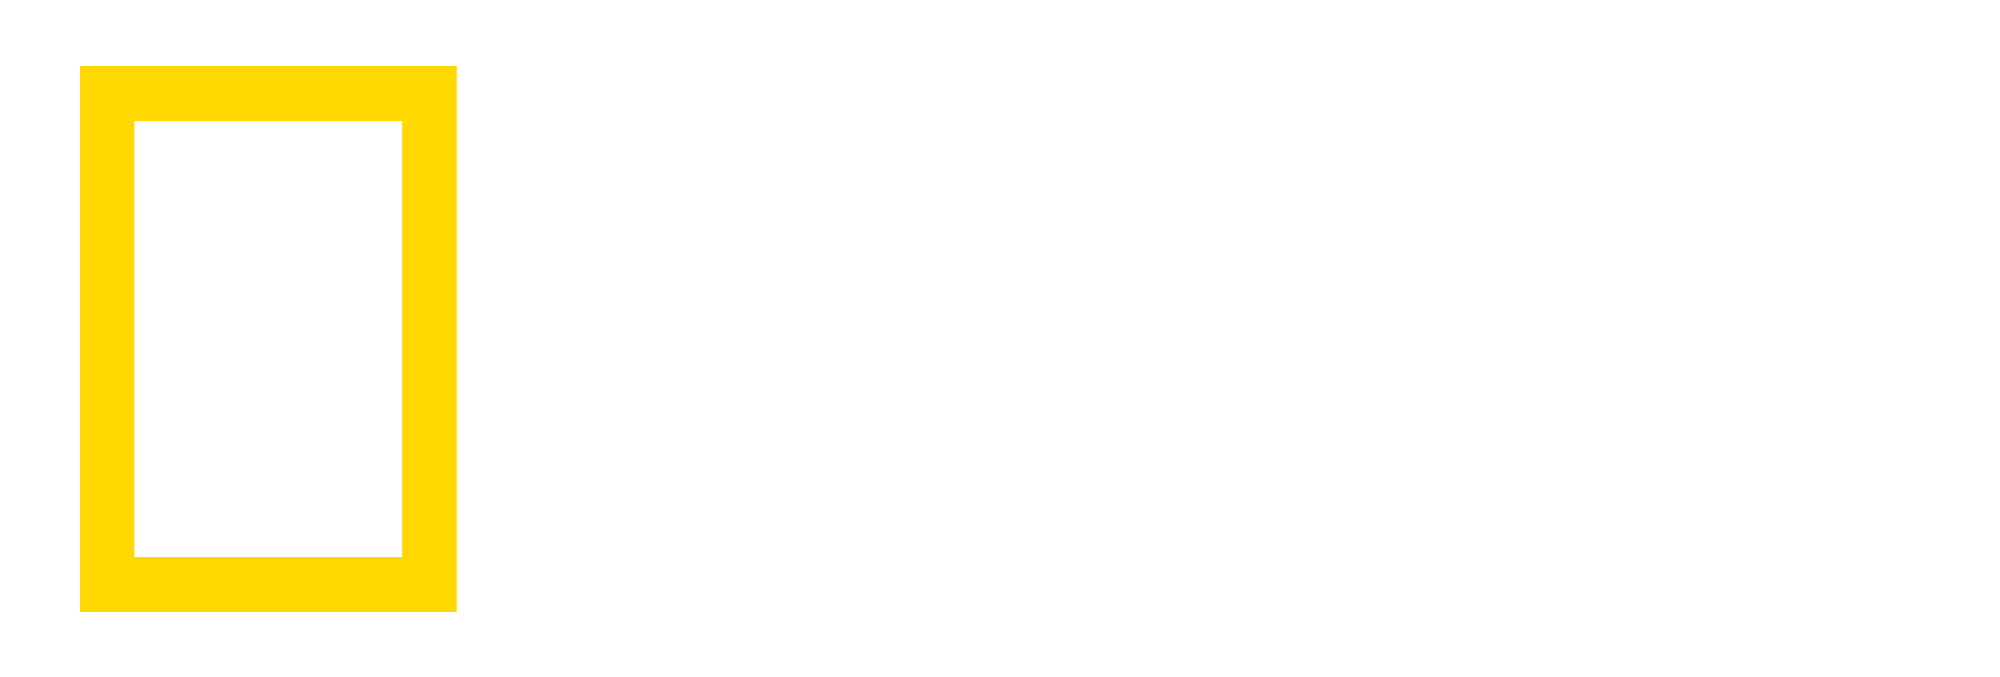 Ng_Logo_White.png - National Geographic, Transparent background PNG HD thumbnail